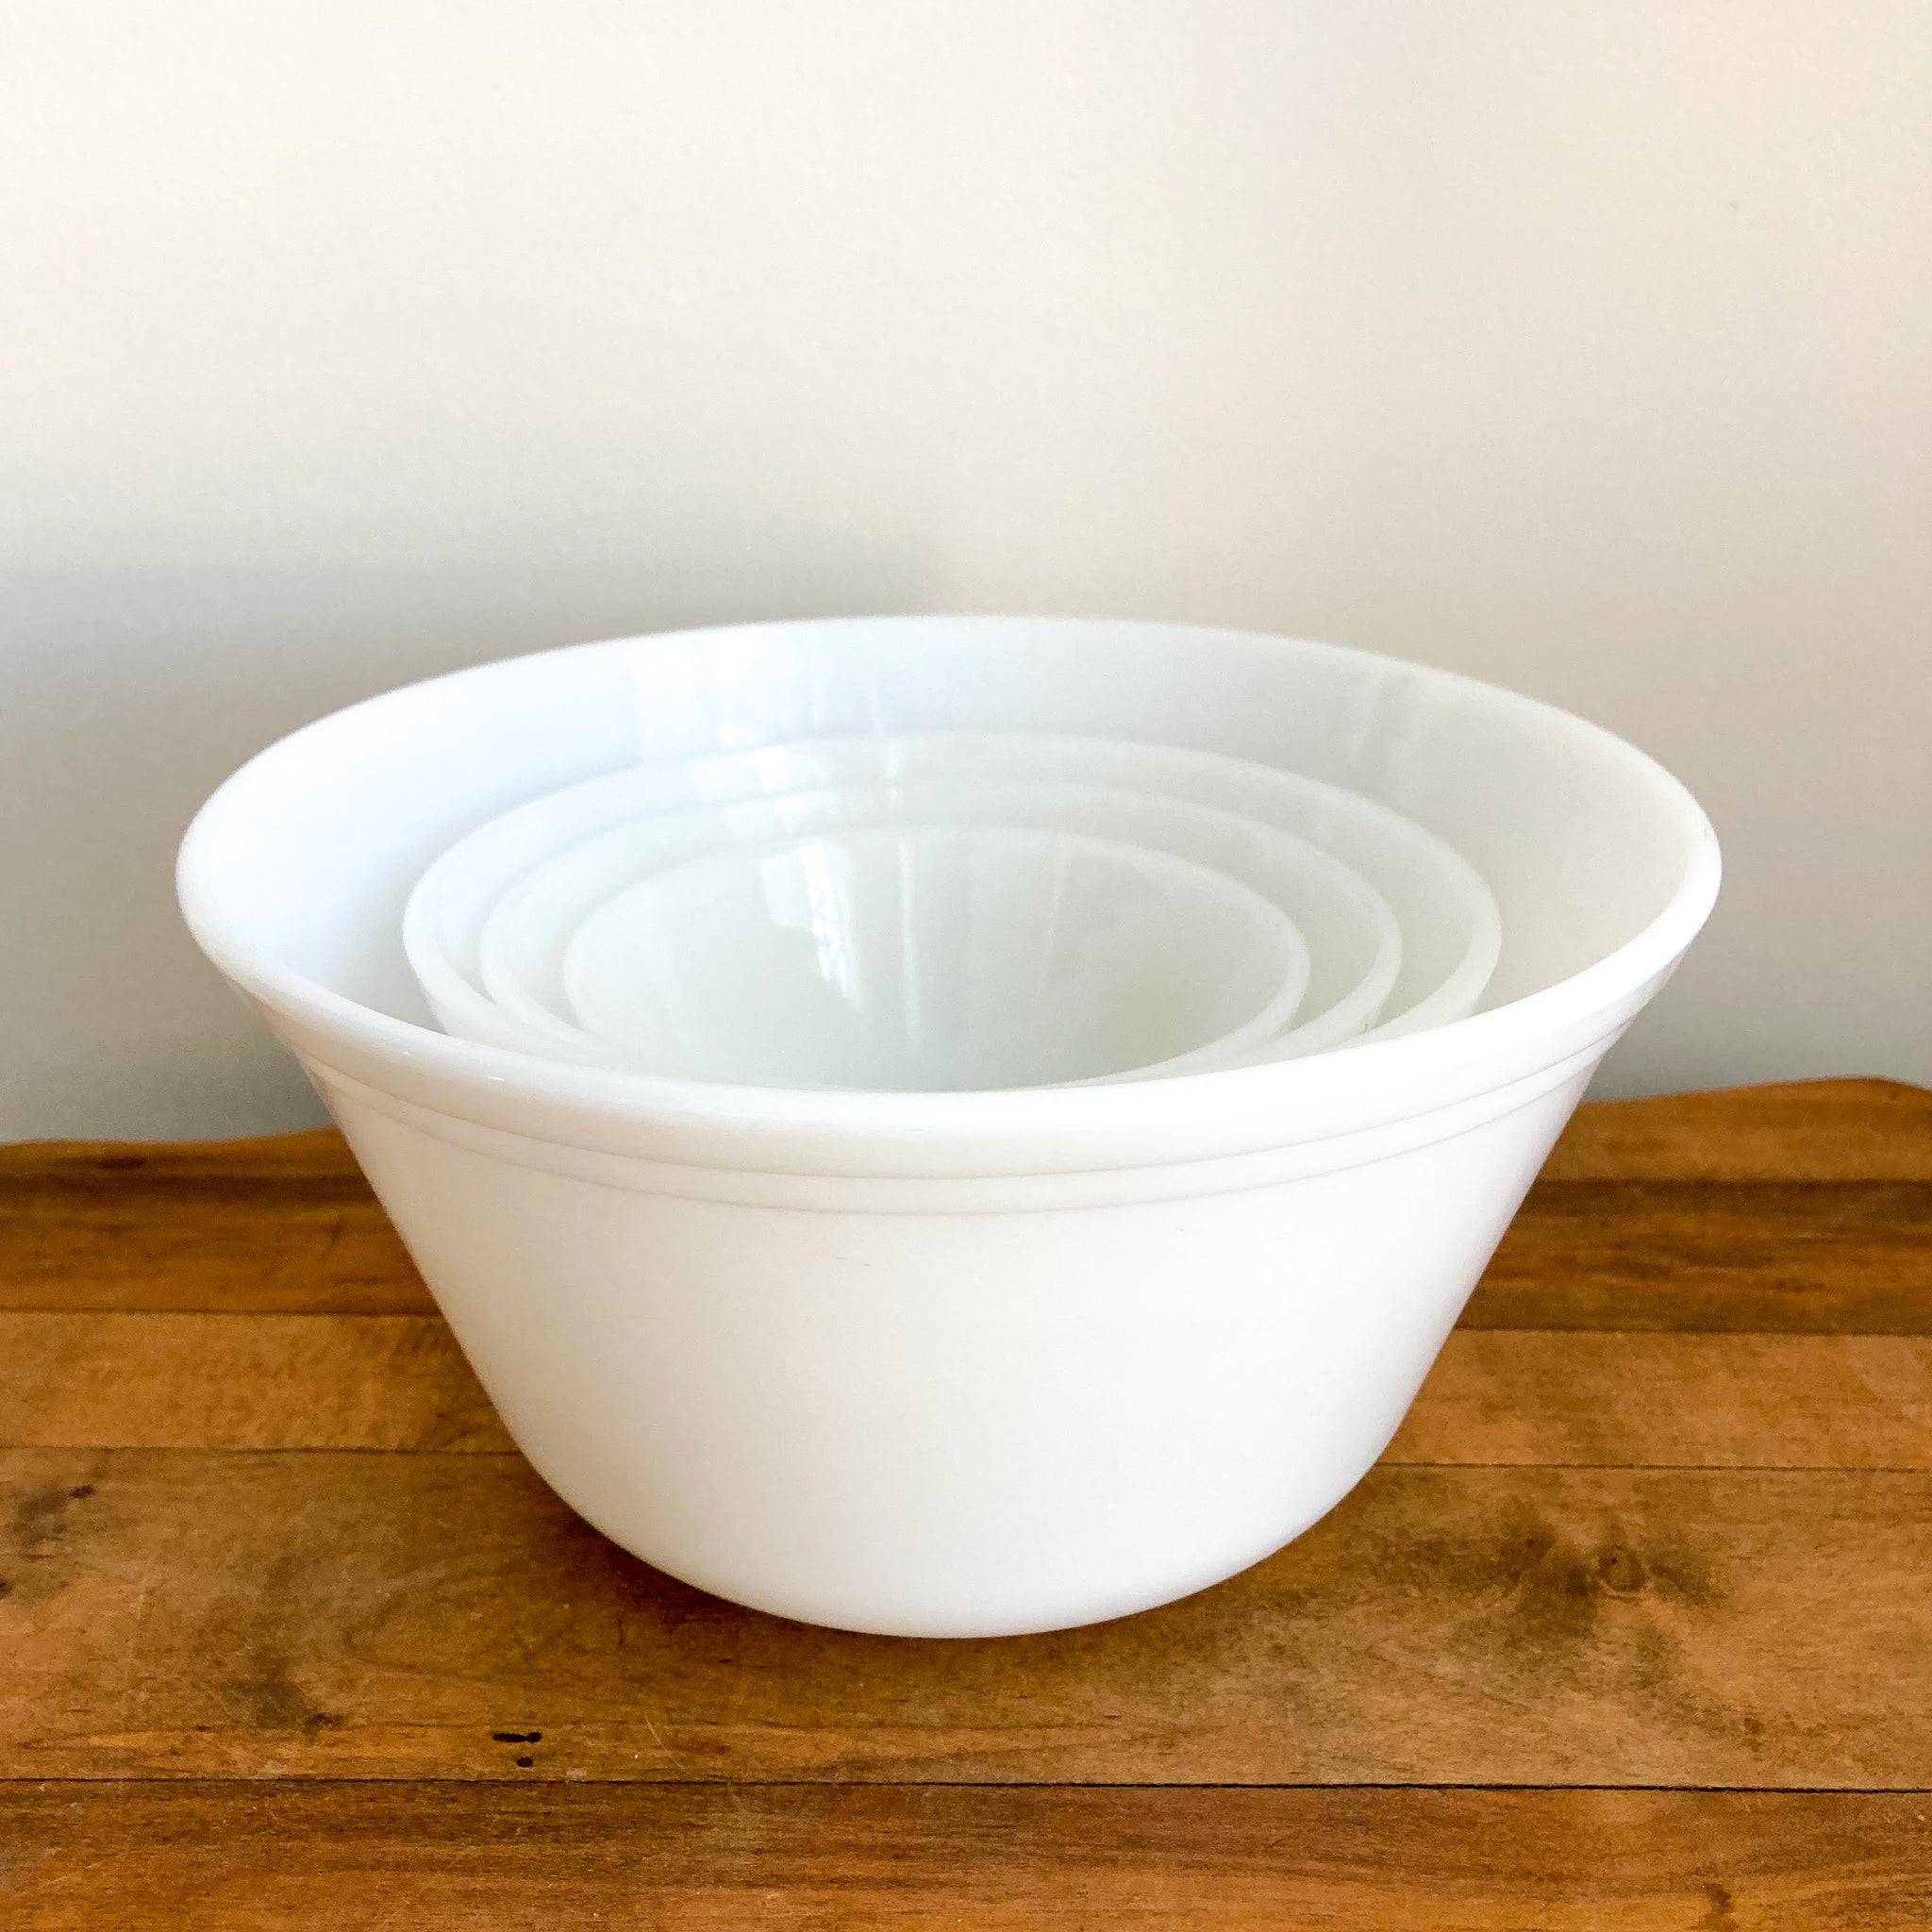 Osnell USA mixing bowls for kitchen - plastic mixing bowls with handles 2.5  qt - mixing bowl set